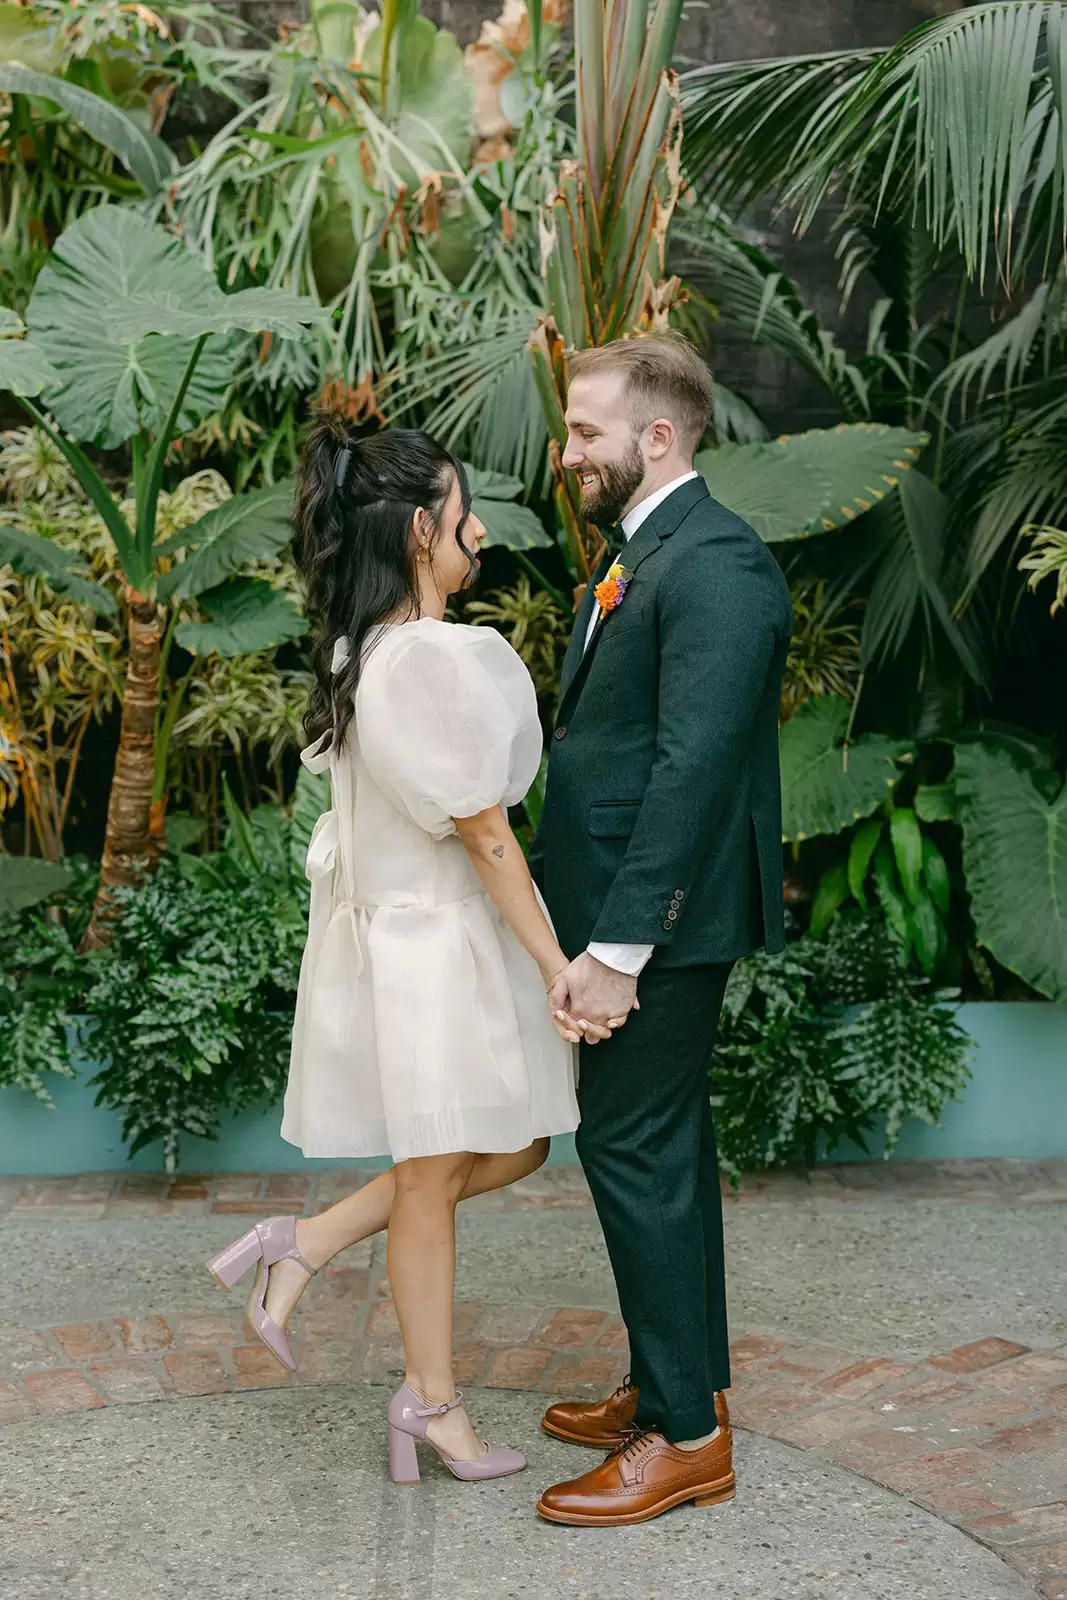 Cute Marriage ceremony in DTLA with a $50K Finances